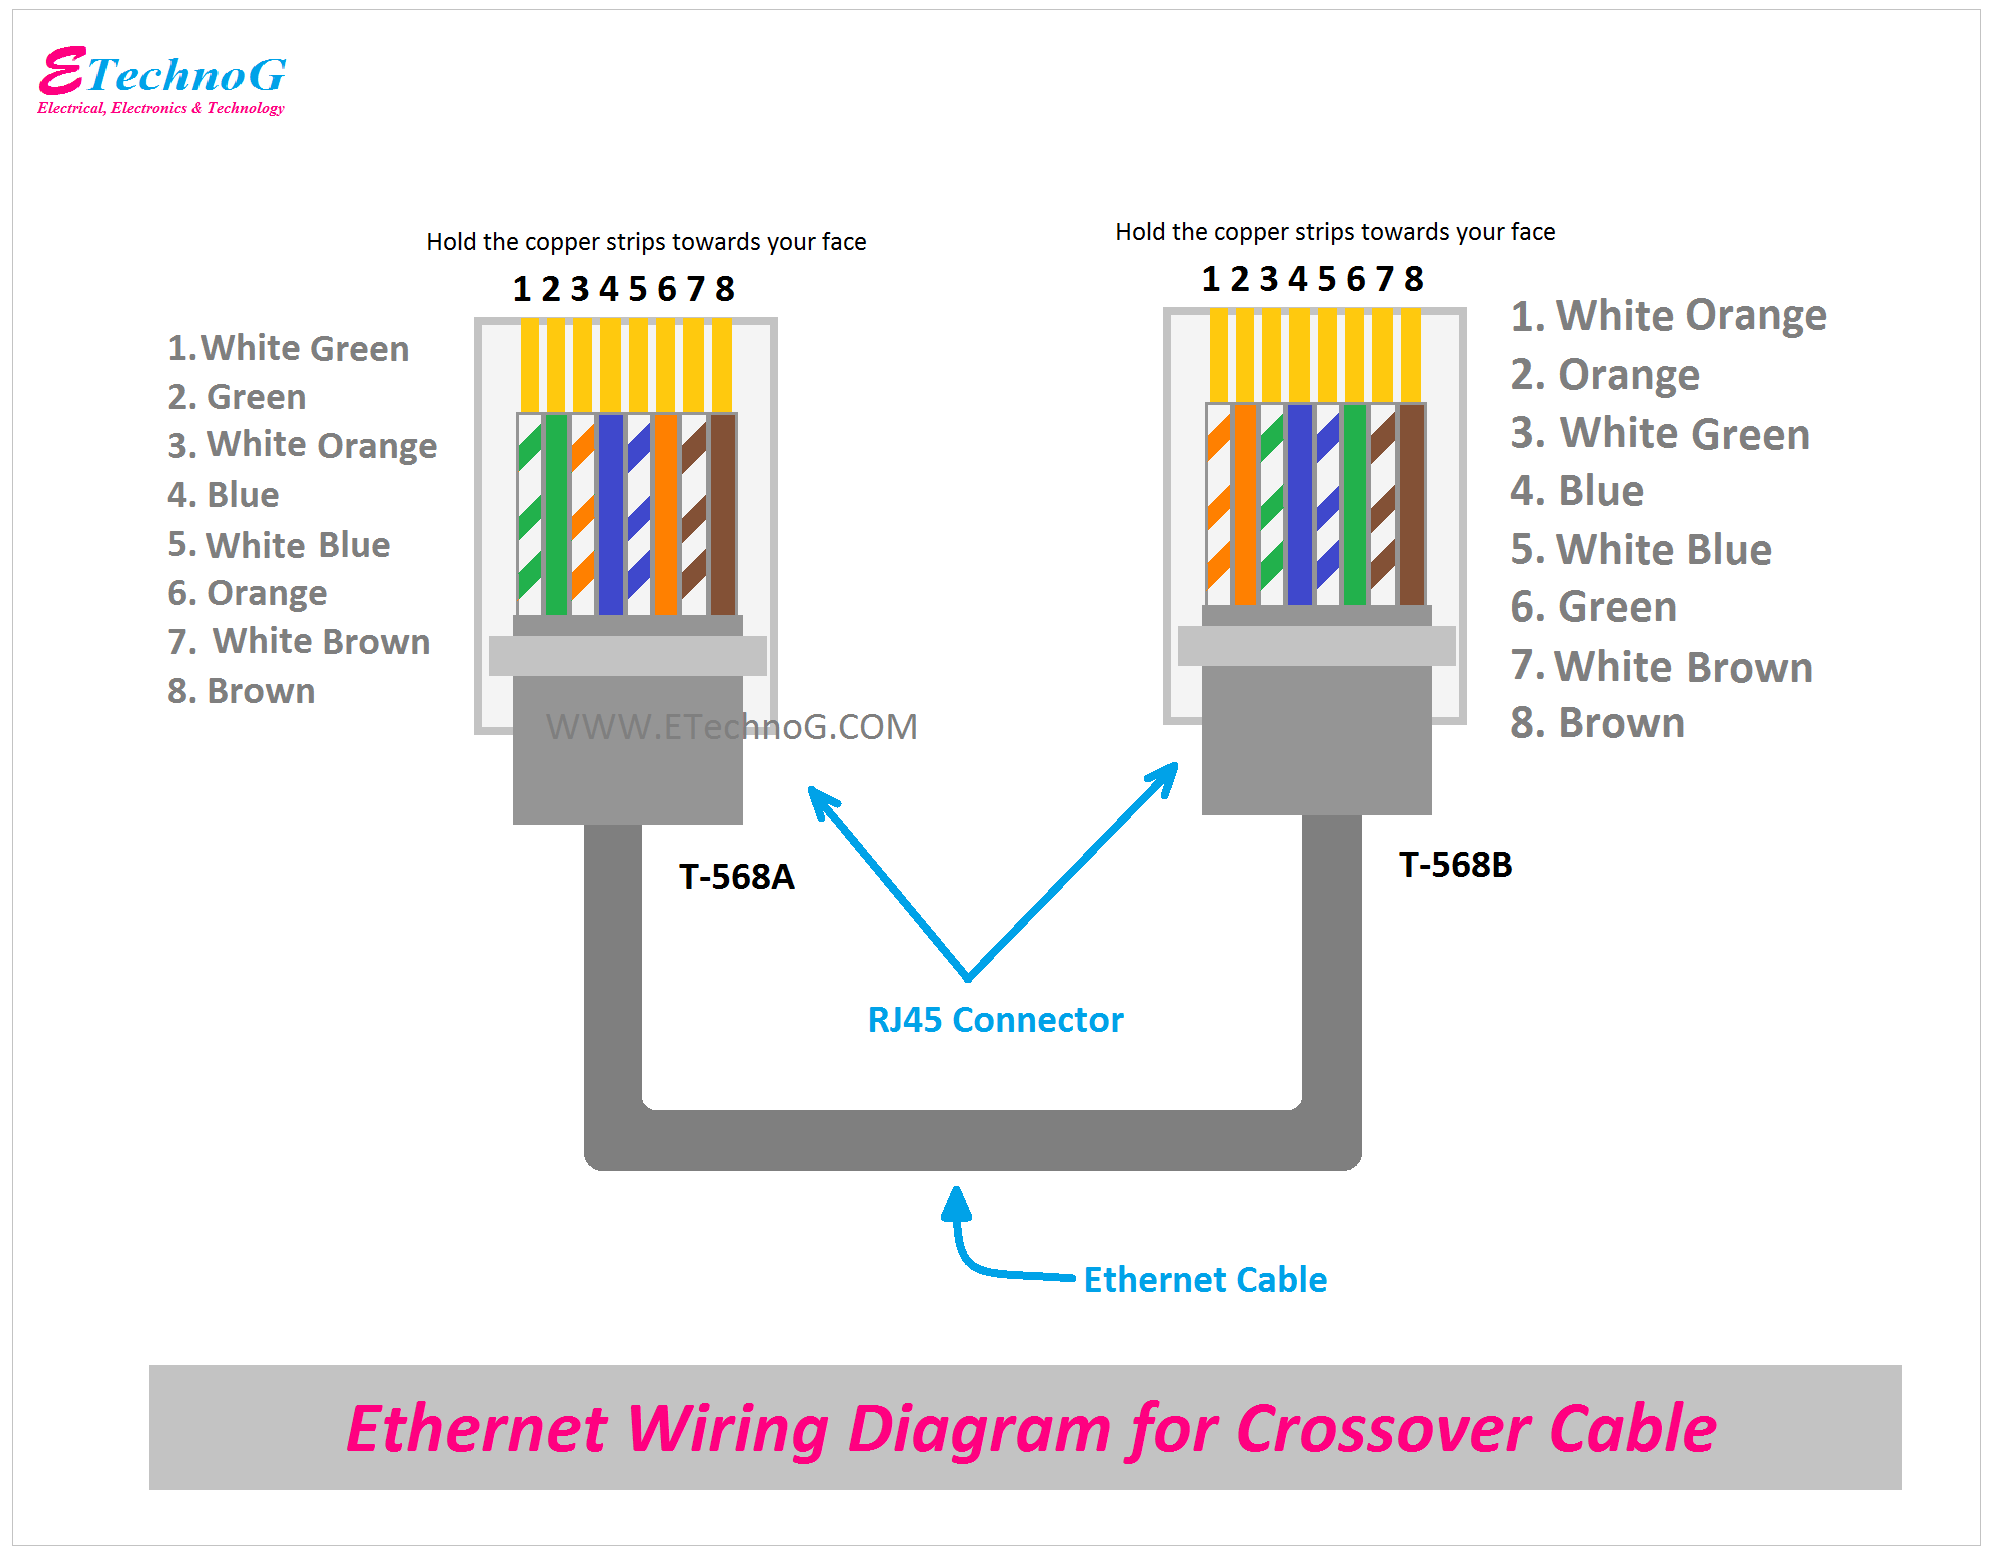 Ethernet Wiring Diagram for Crossover Cable